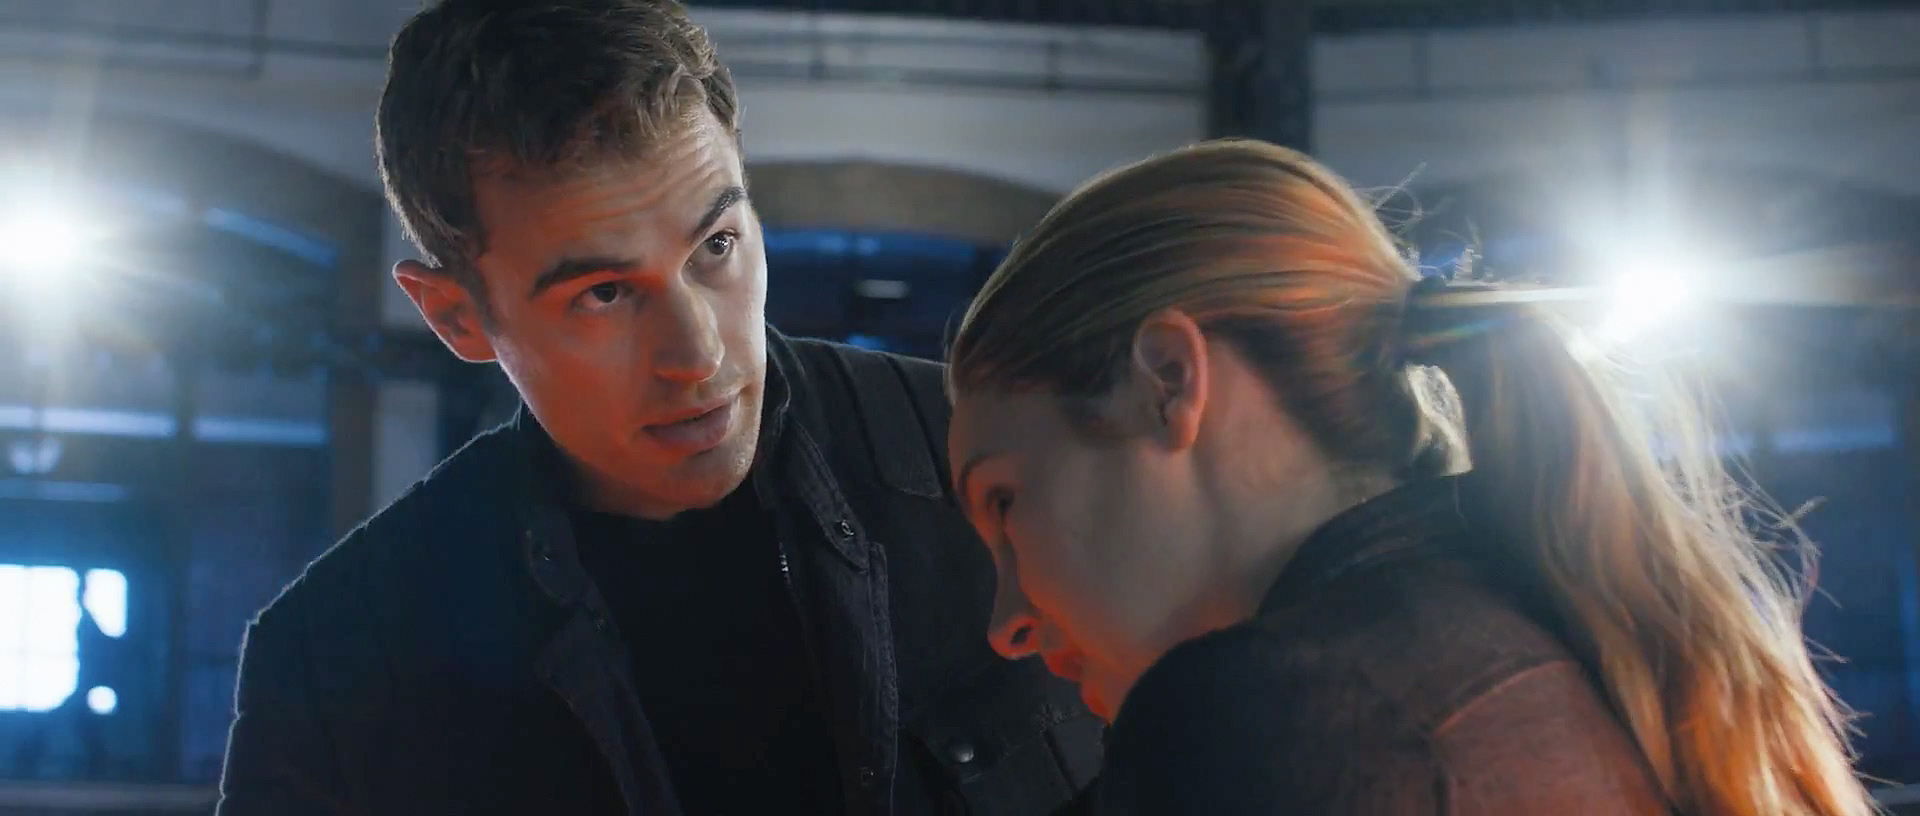 first-official-footage-from-the-futuristic-action-film-divergent-7.jpg